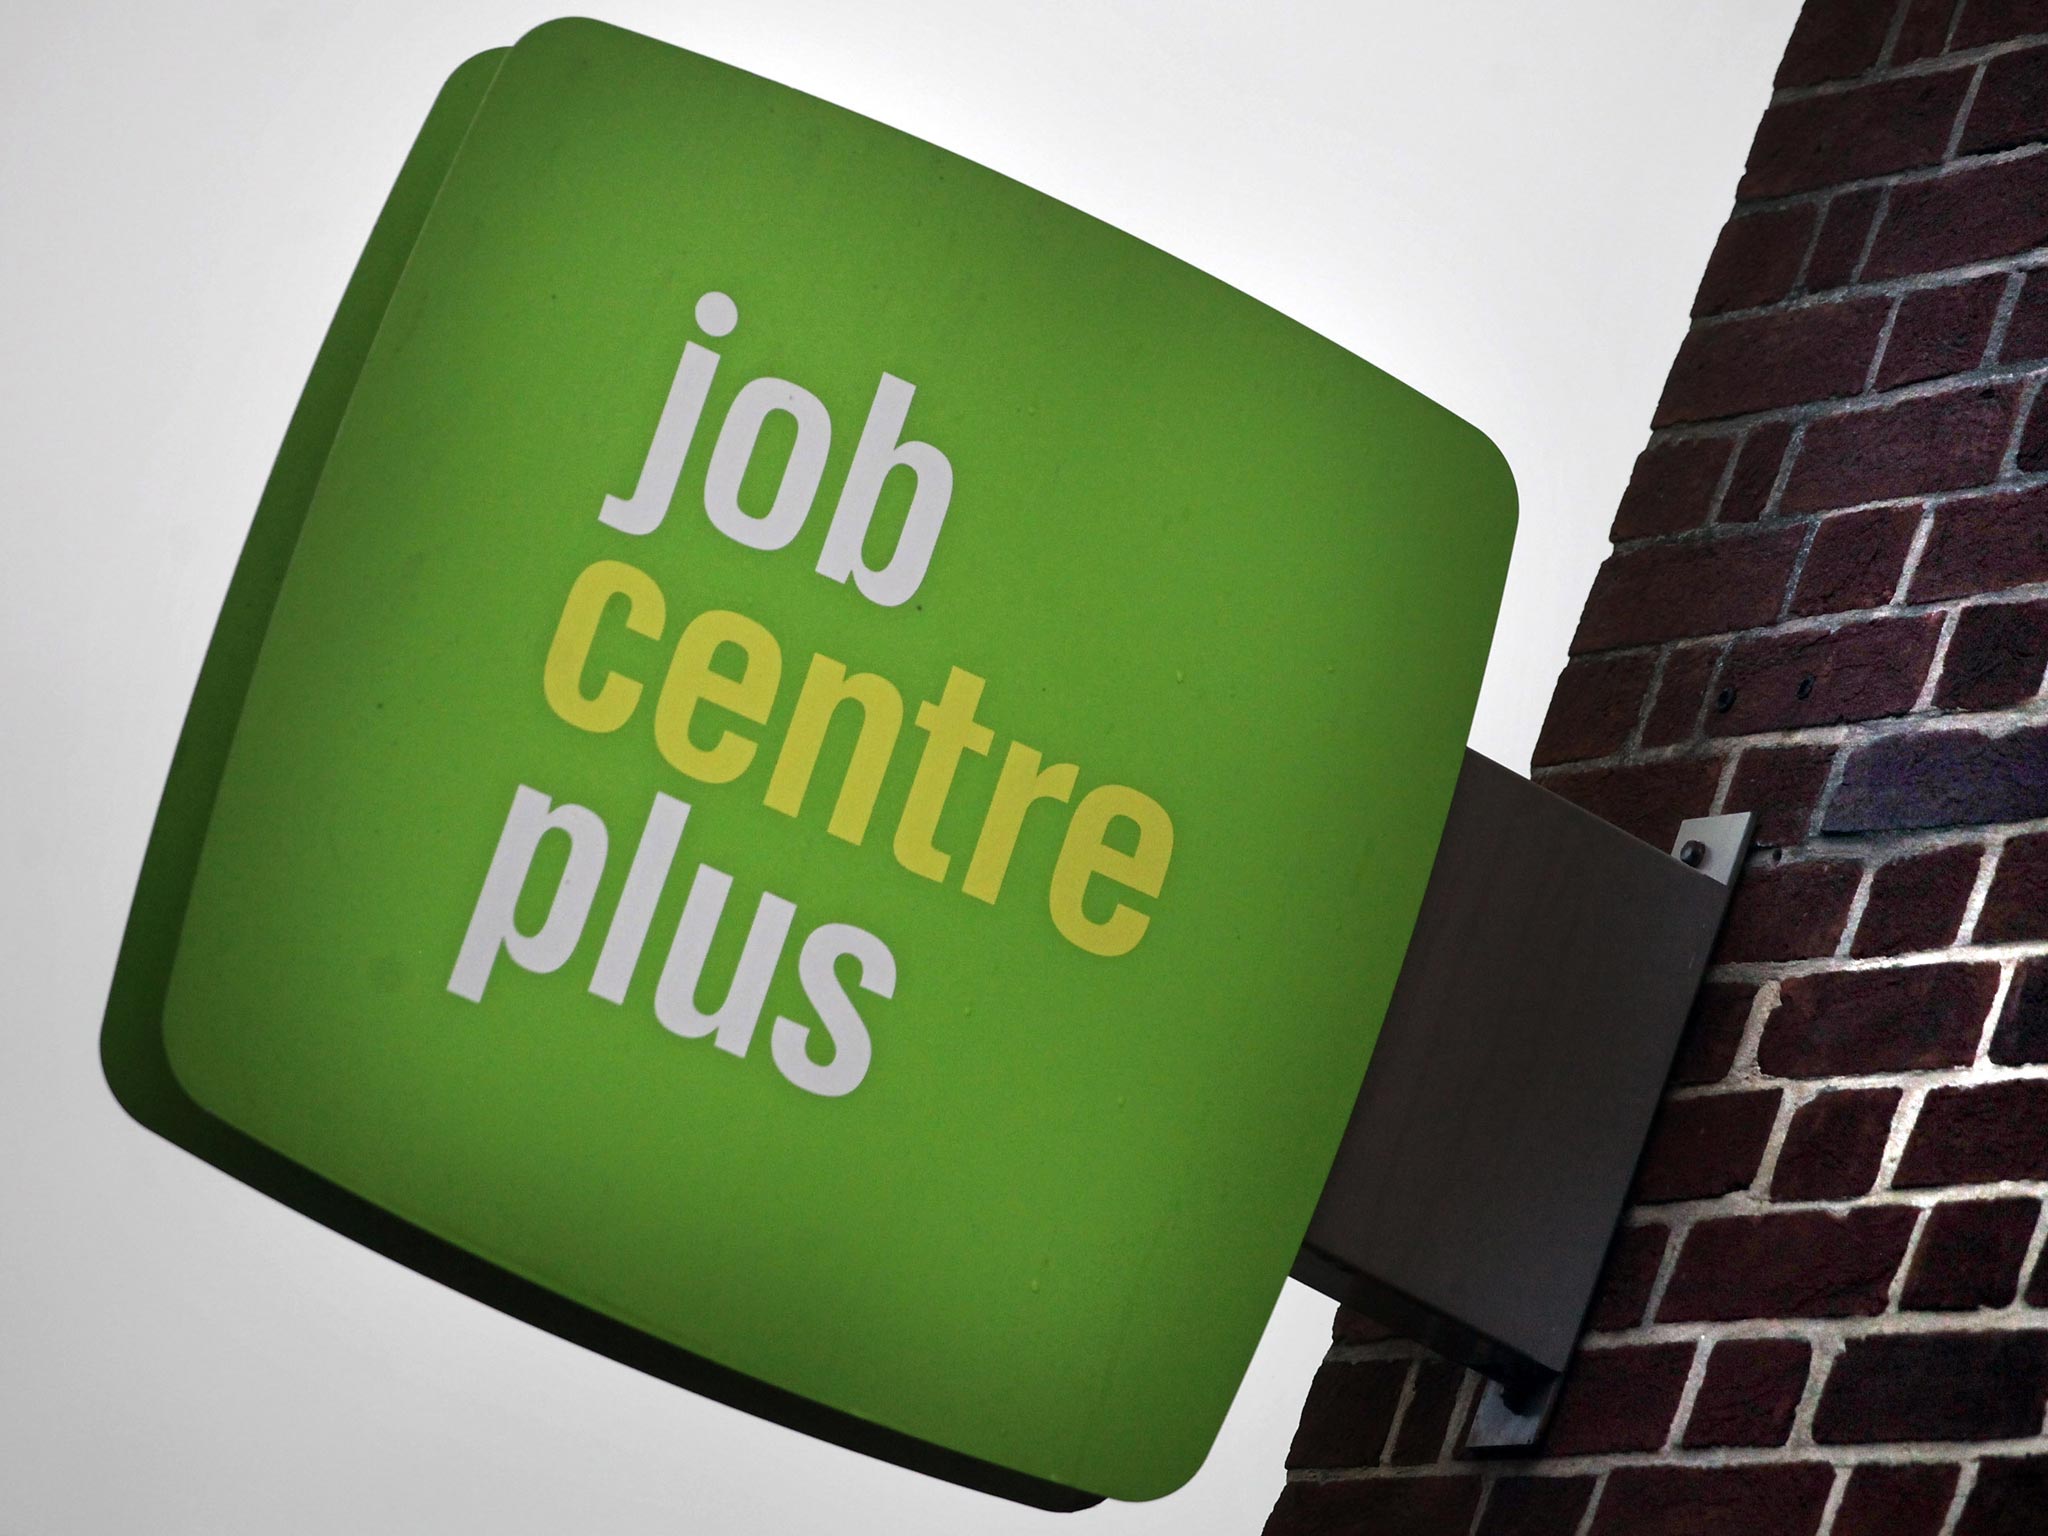 The Government’s universal credit scheme is suffering from technical IT issues